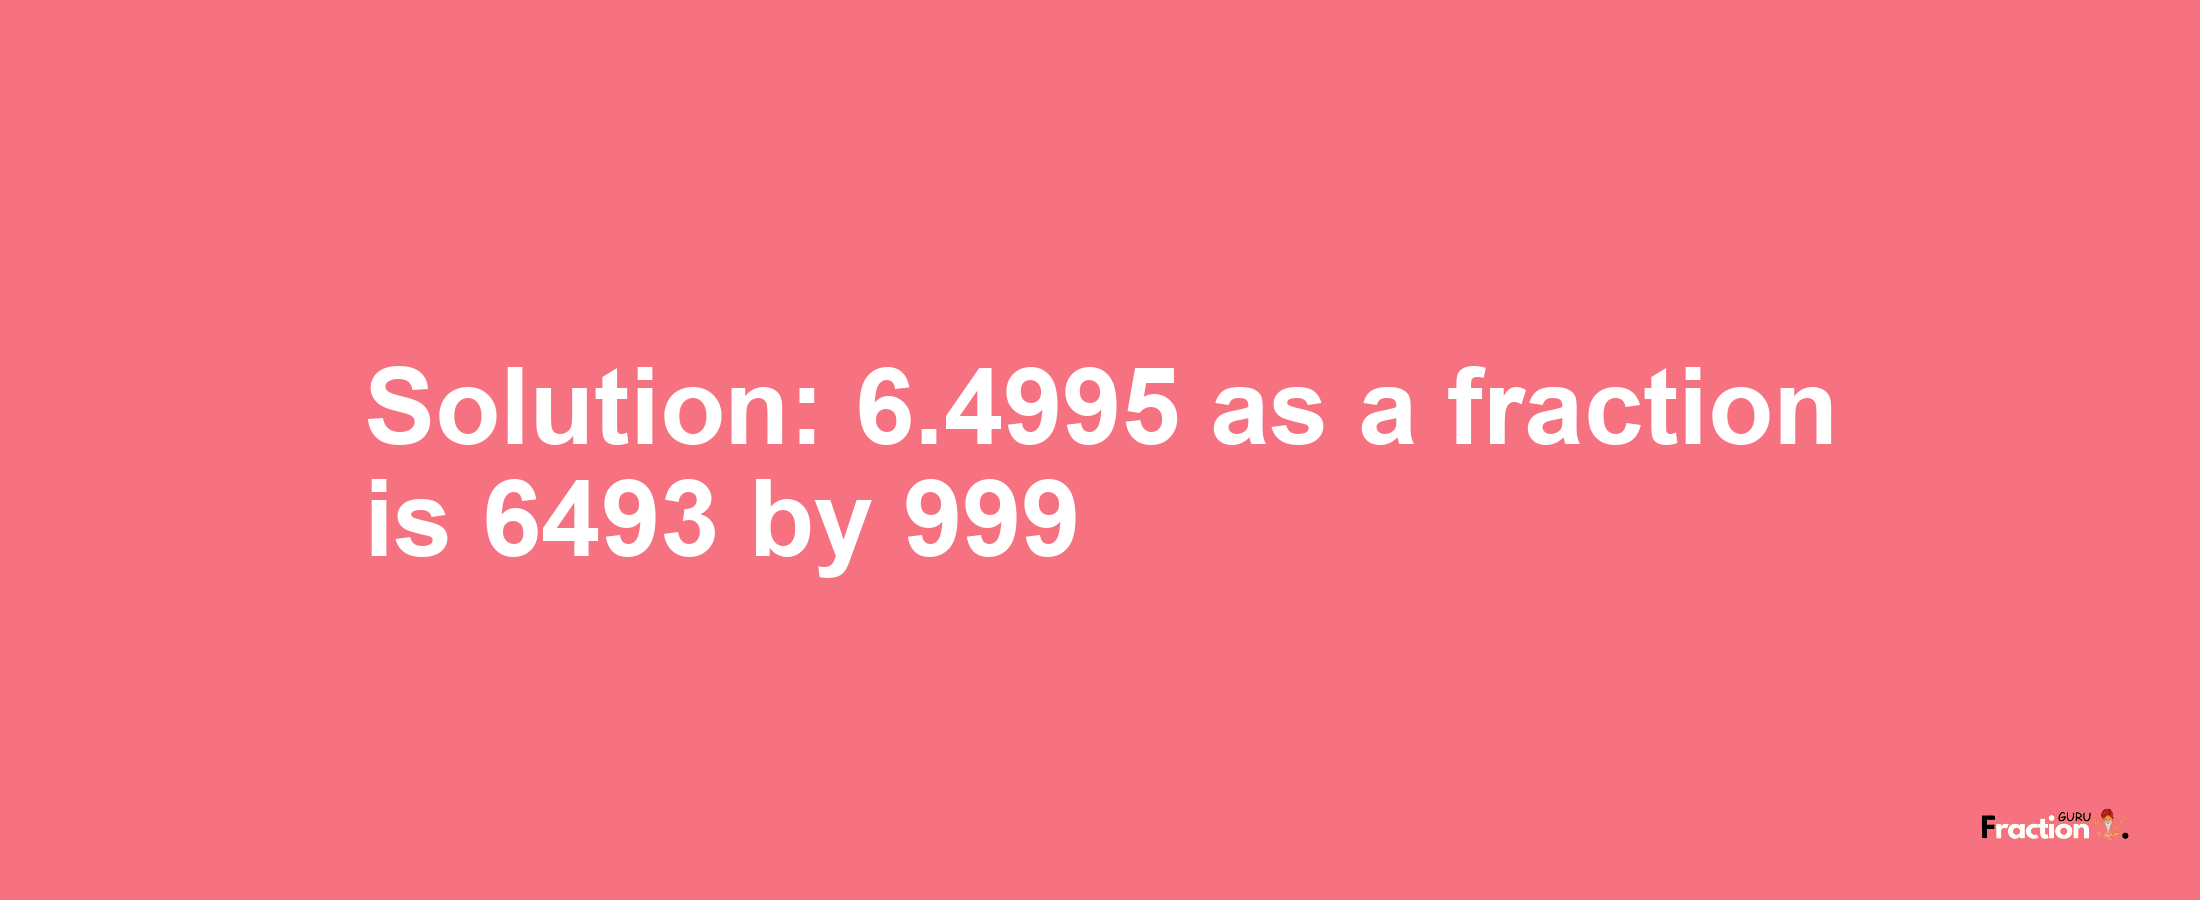 Solution:6.4995 as a fraction is 6493/999